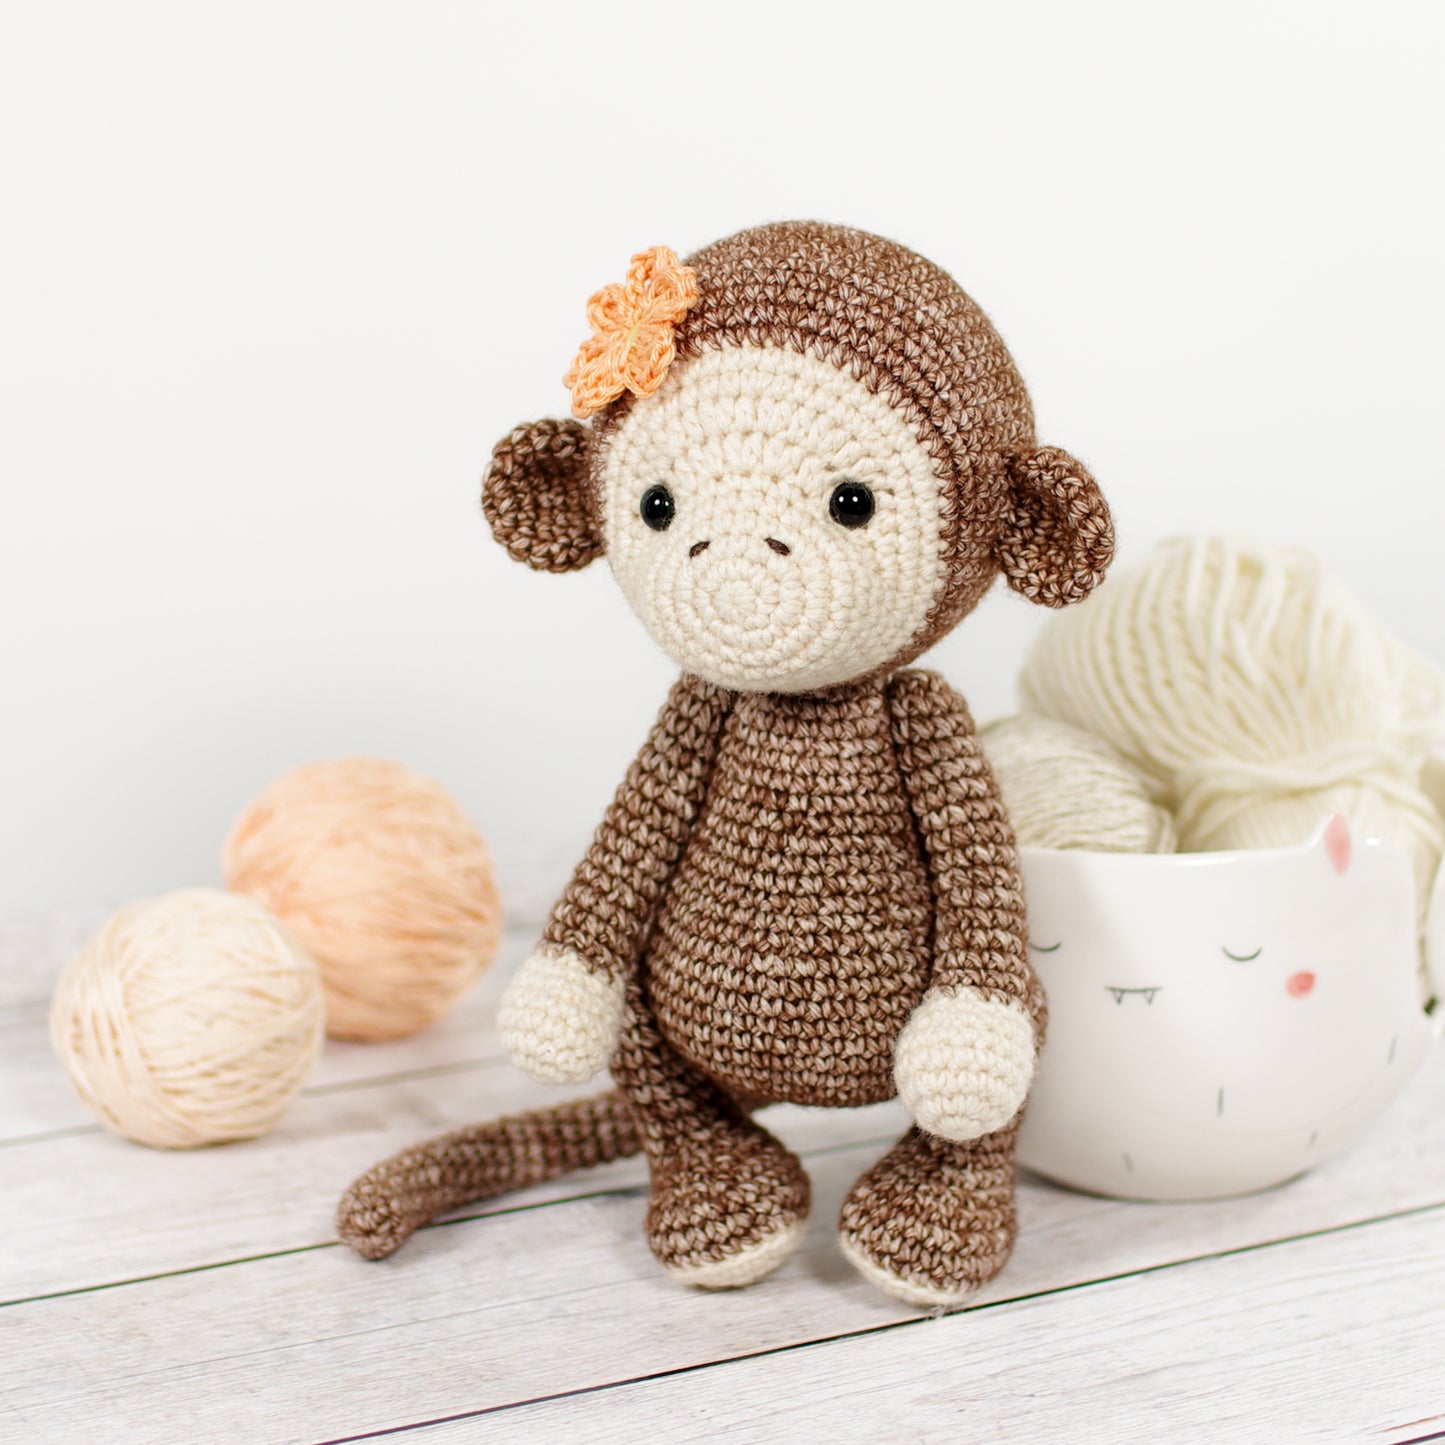 PATTERN: Lucy the Monkey